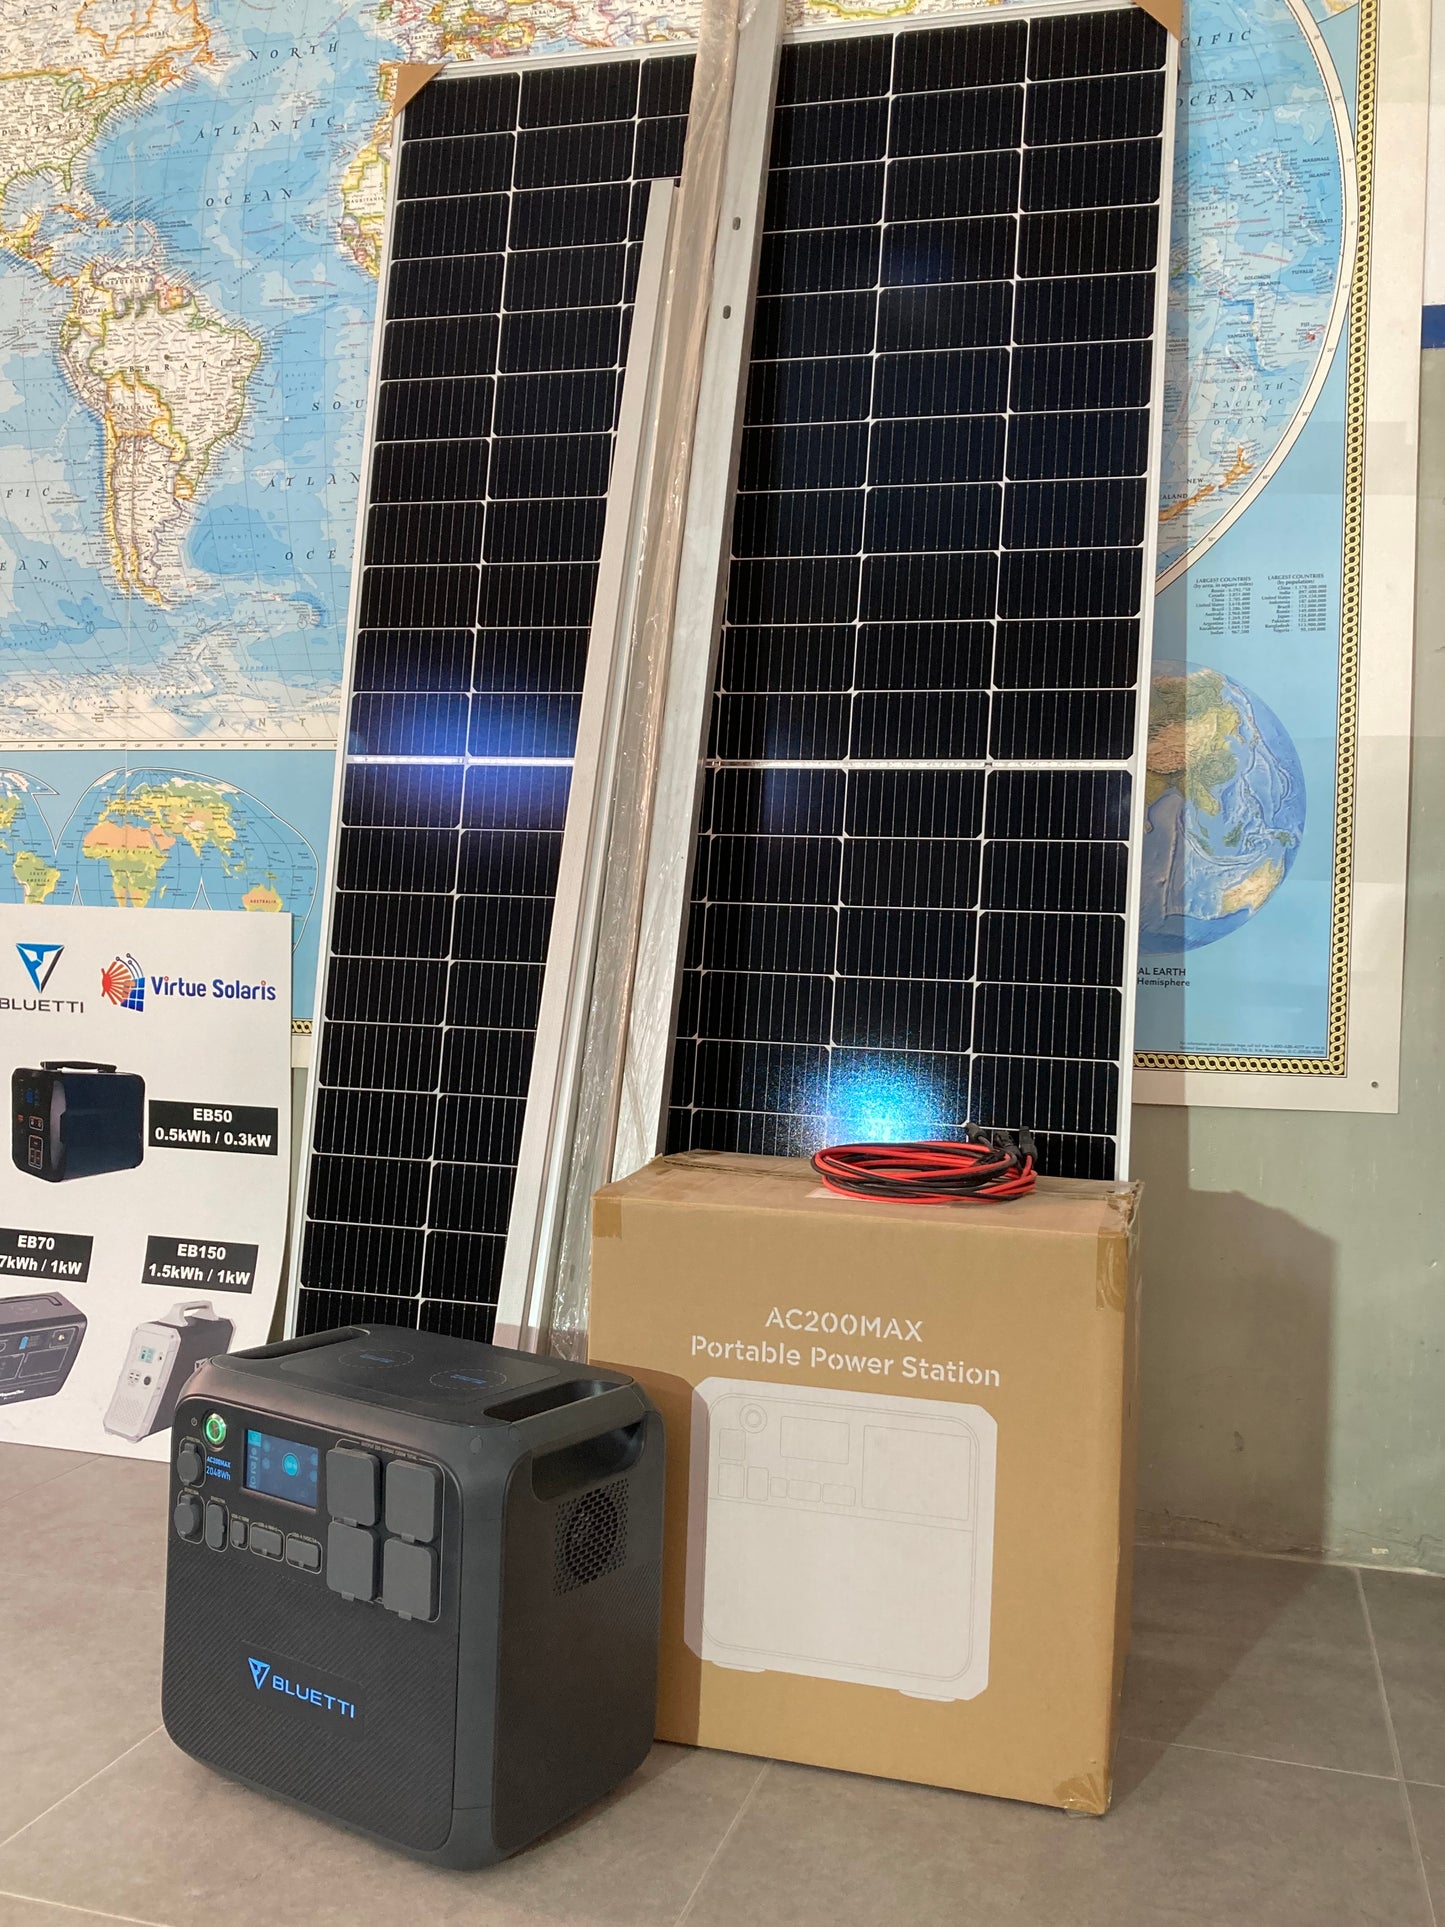 Off-grid solar power kit: Bluetti AC200 MAX solar generator + 505Wp solar panel, mounting and cabling accessories